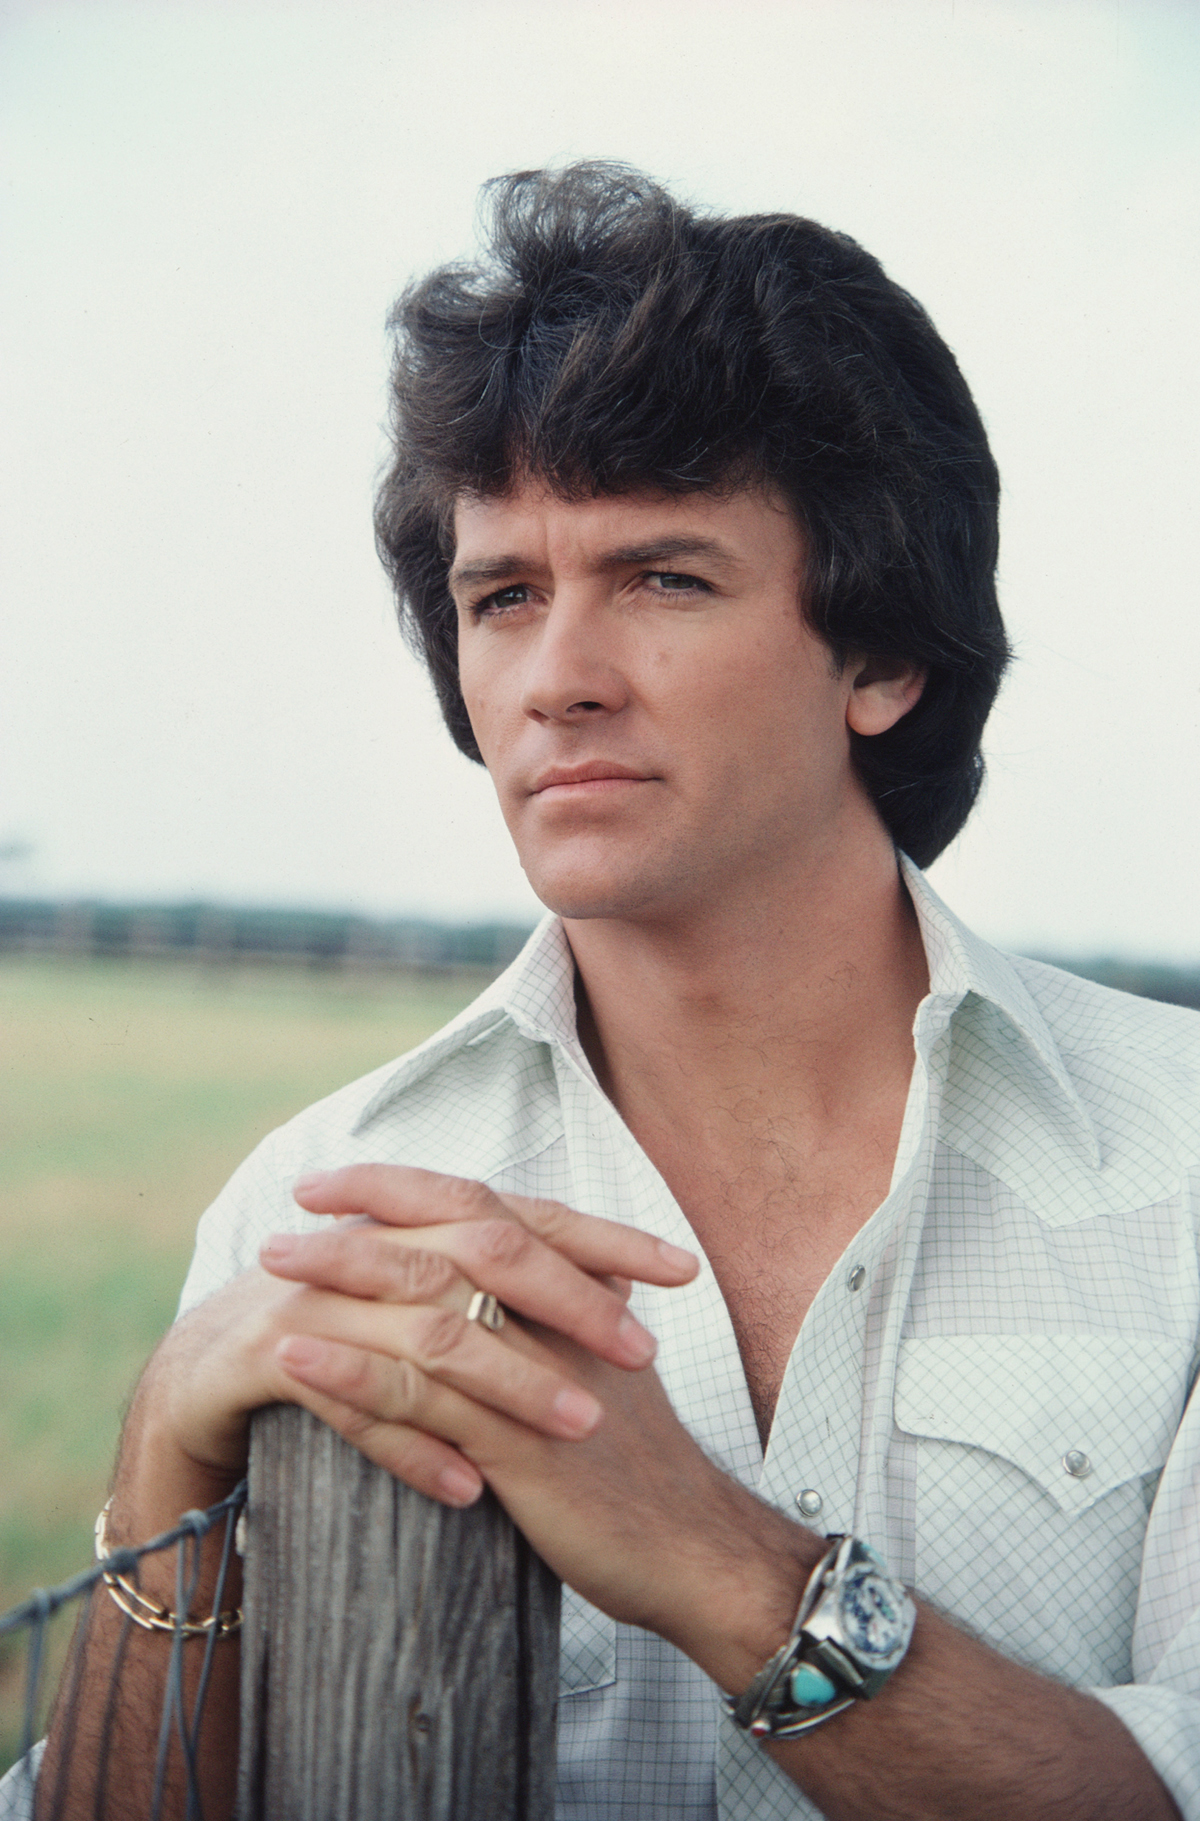 Patrick Duffy on "Dallas" in 1979 | Source: Getty Images